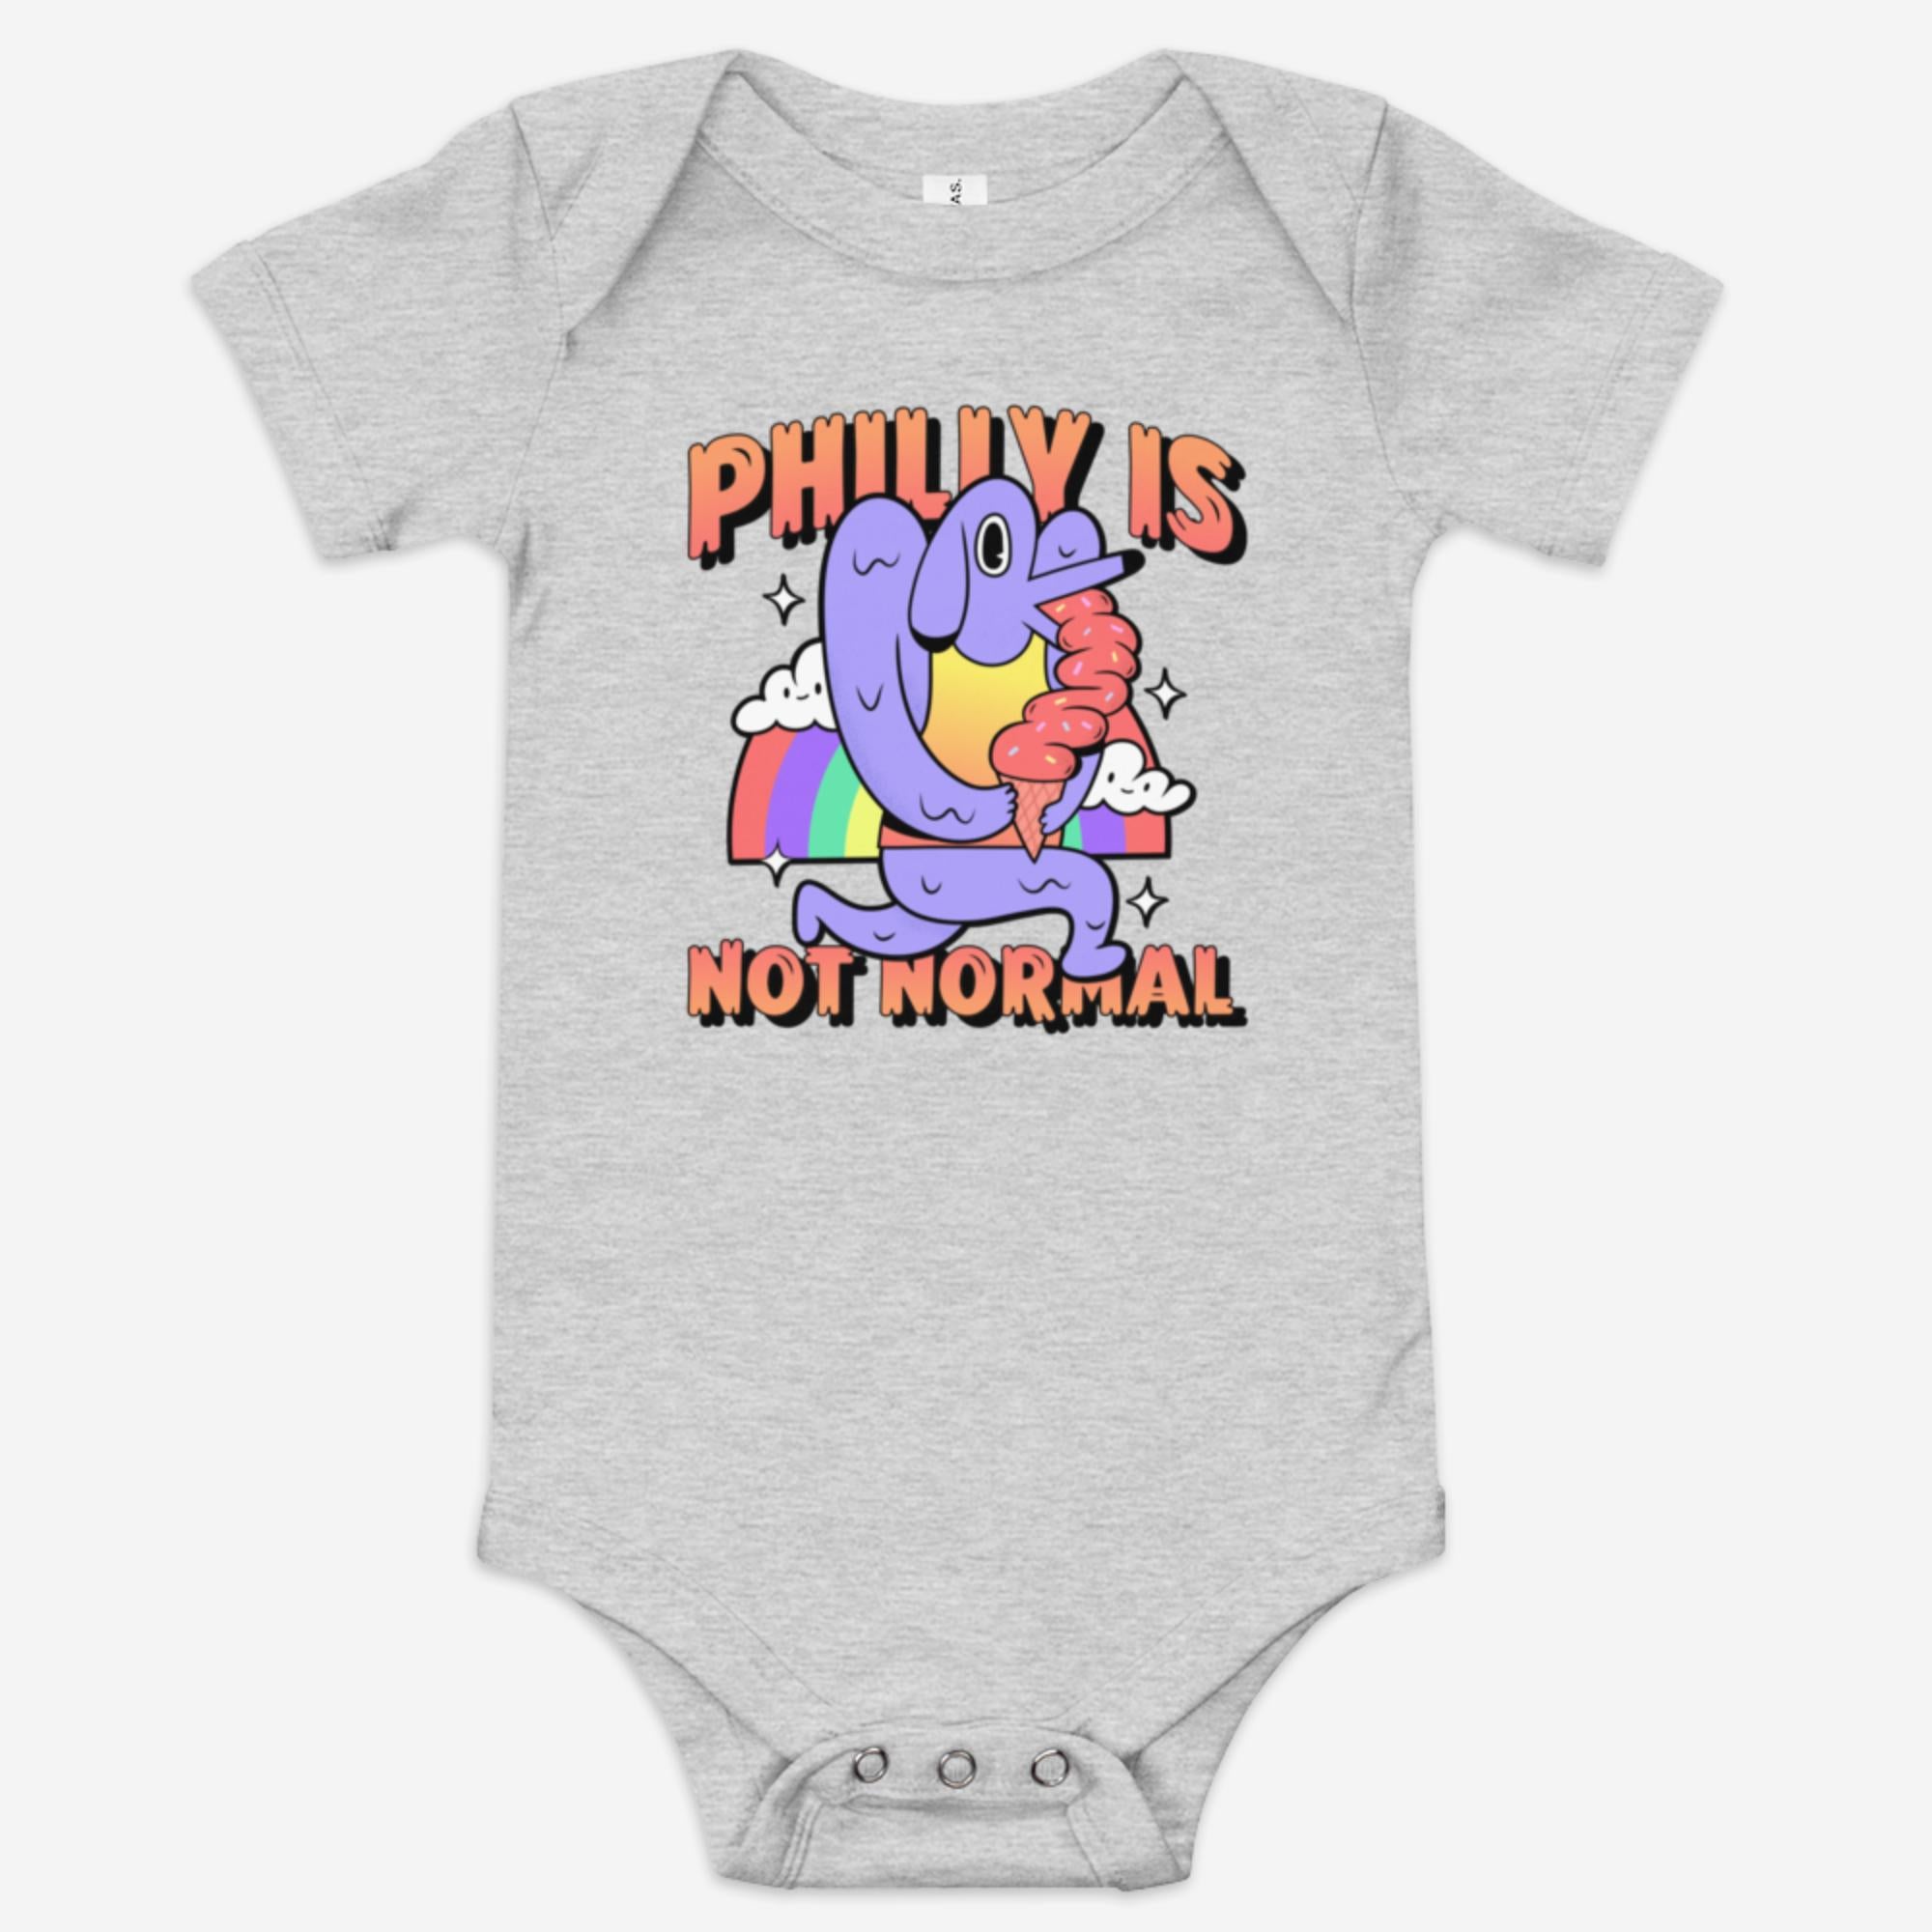 "Philly Is Not Normal" Baby Onesie